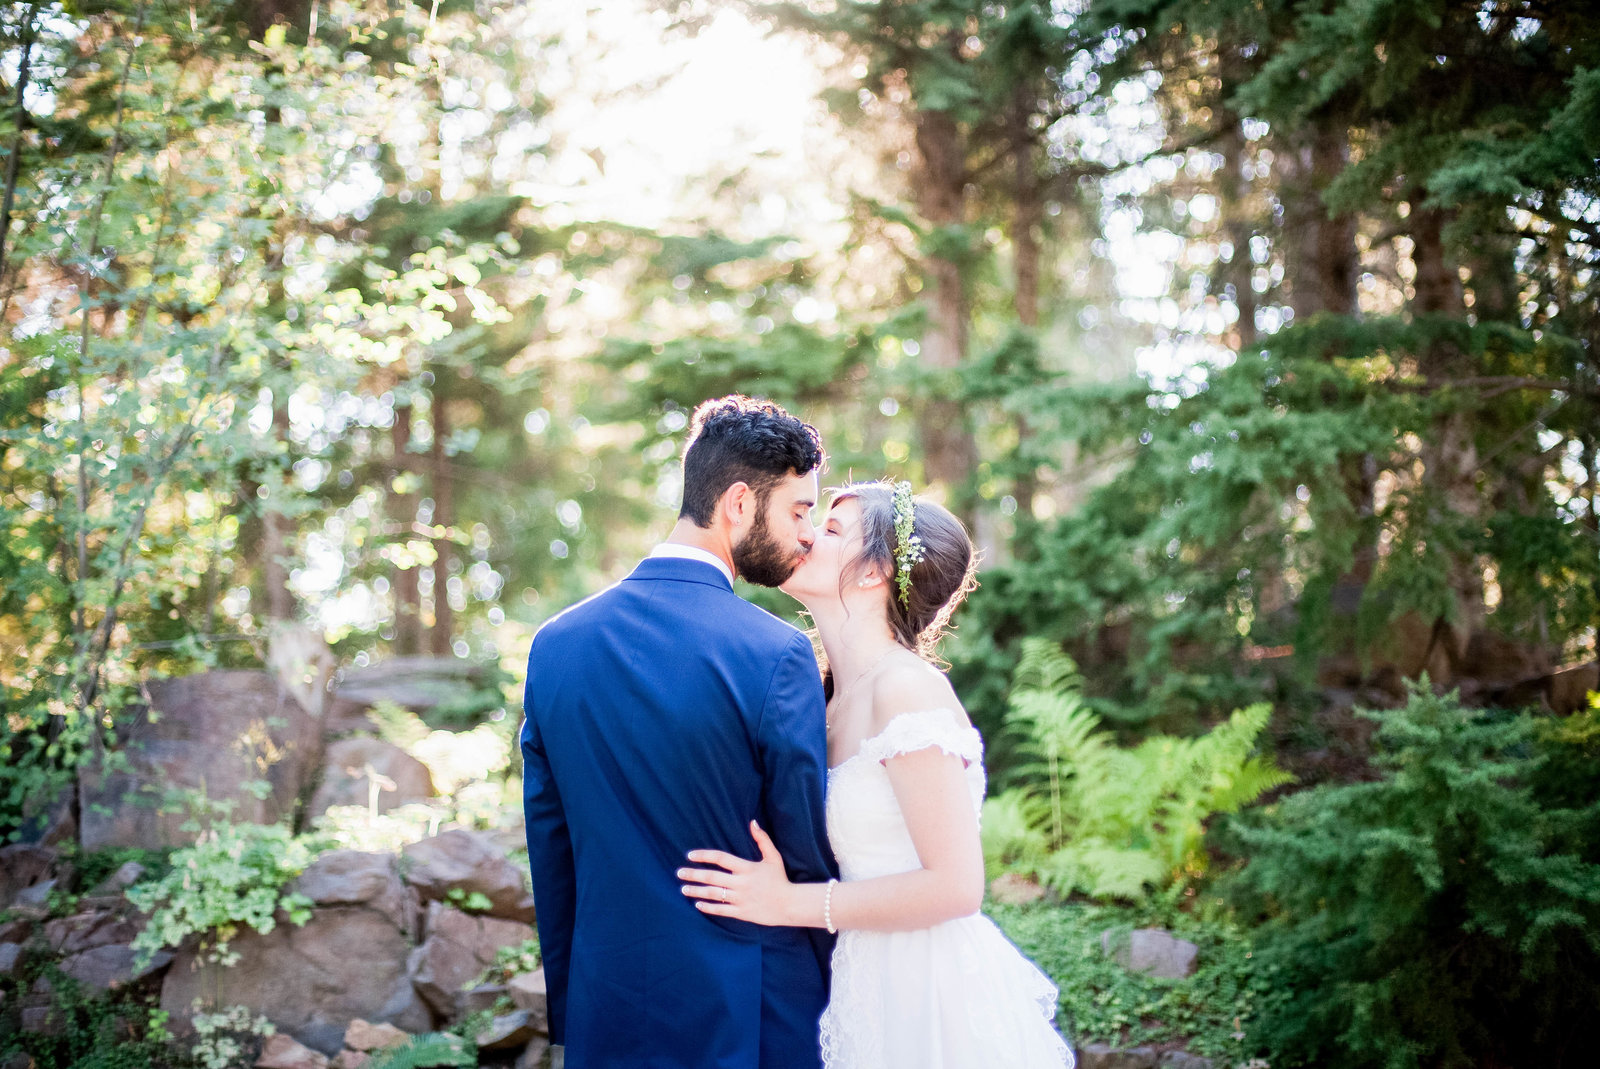 A bride and groom kissing in a forest.